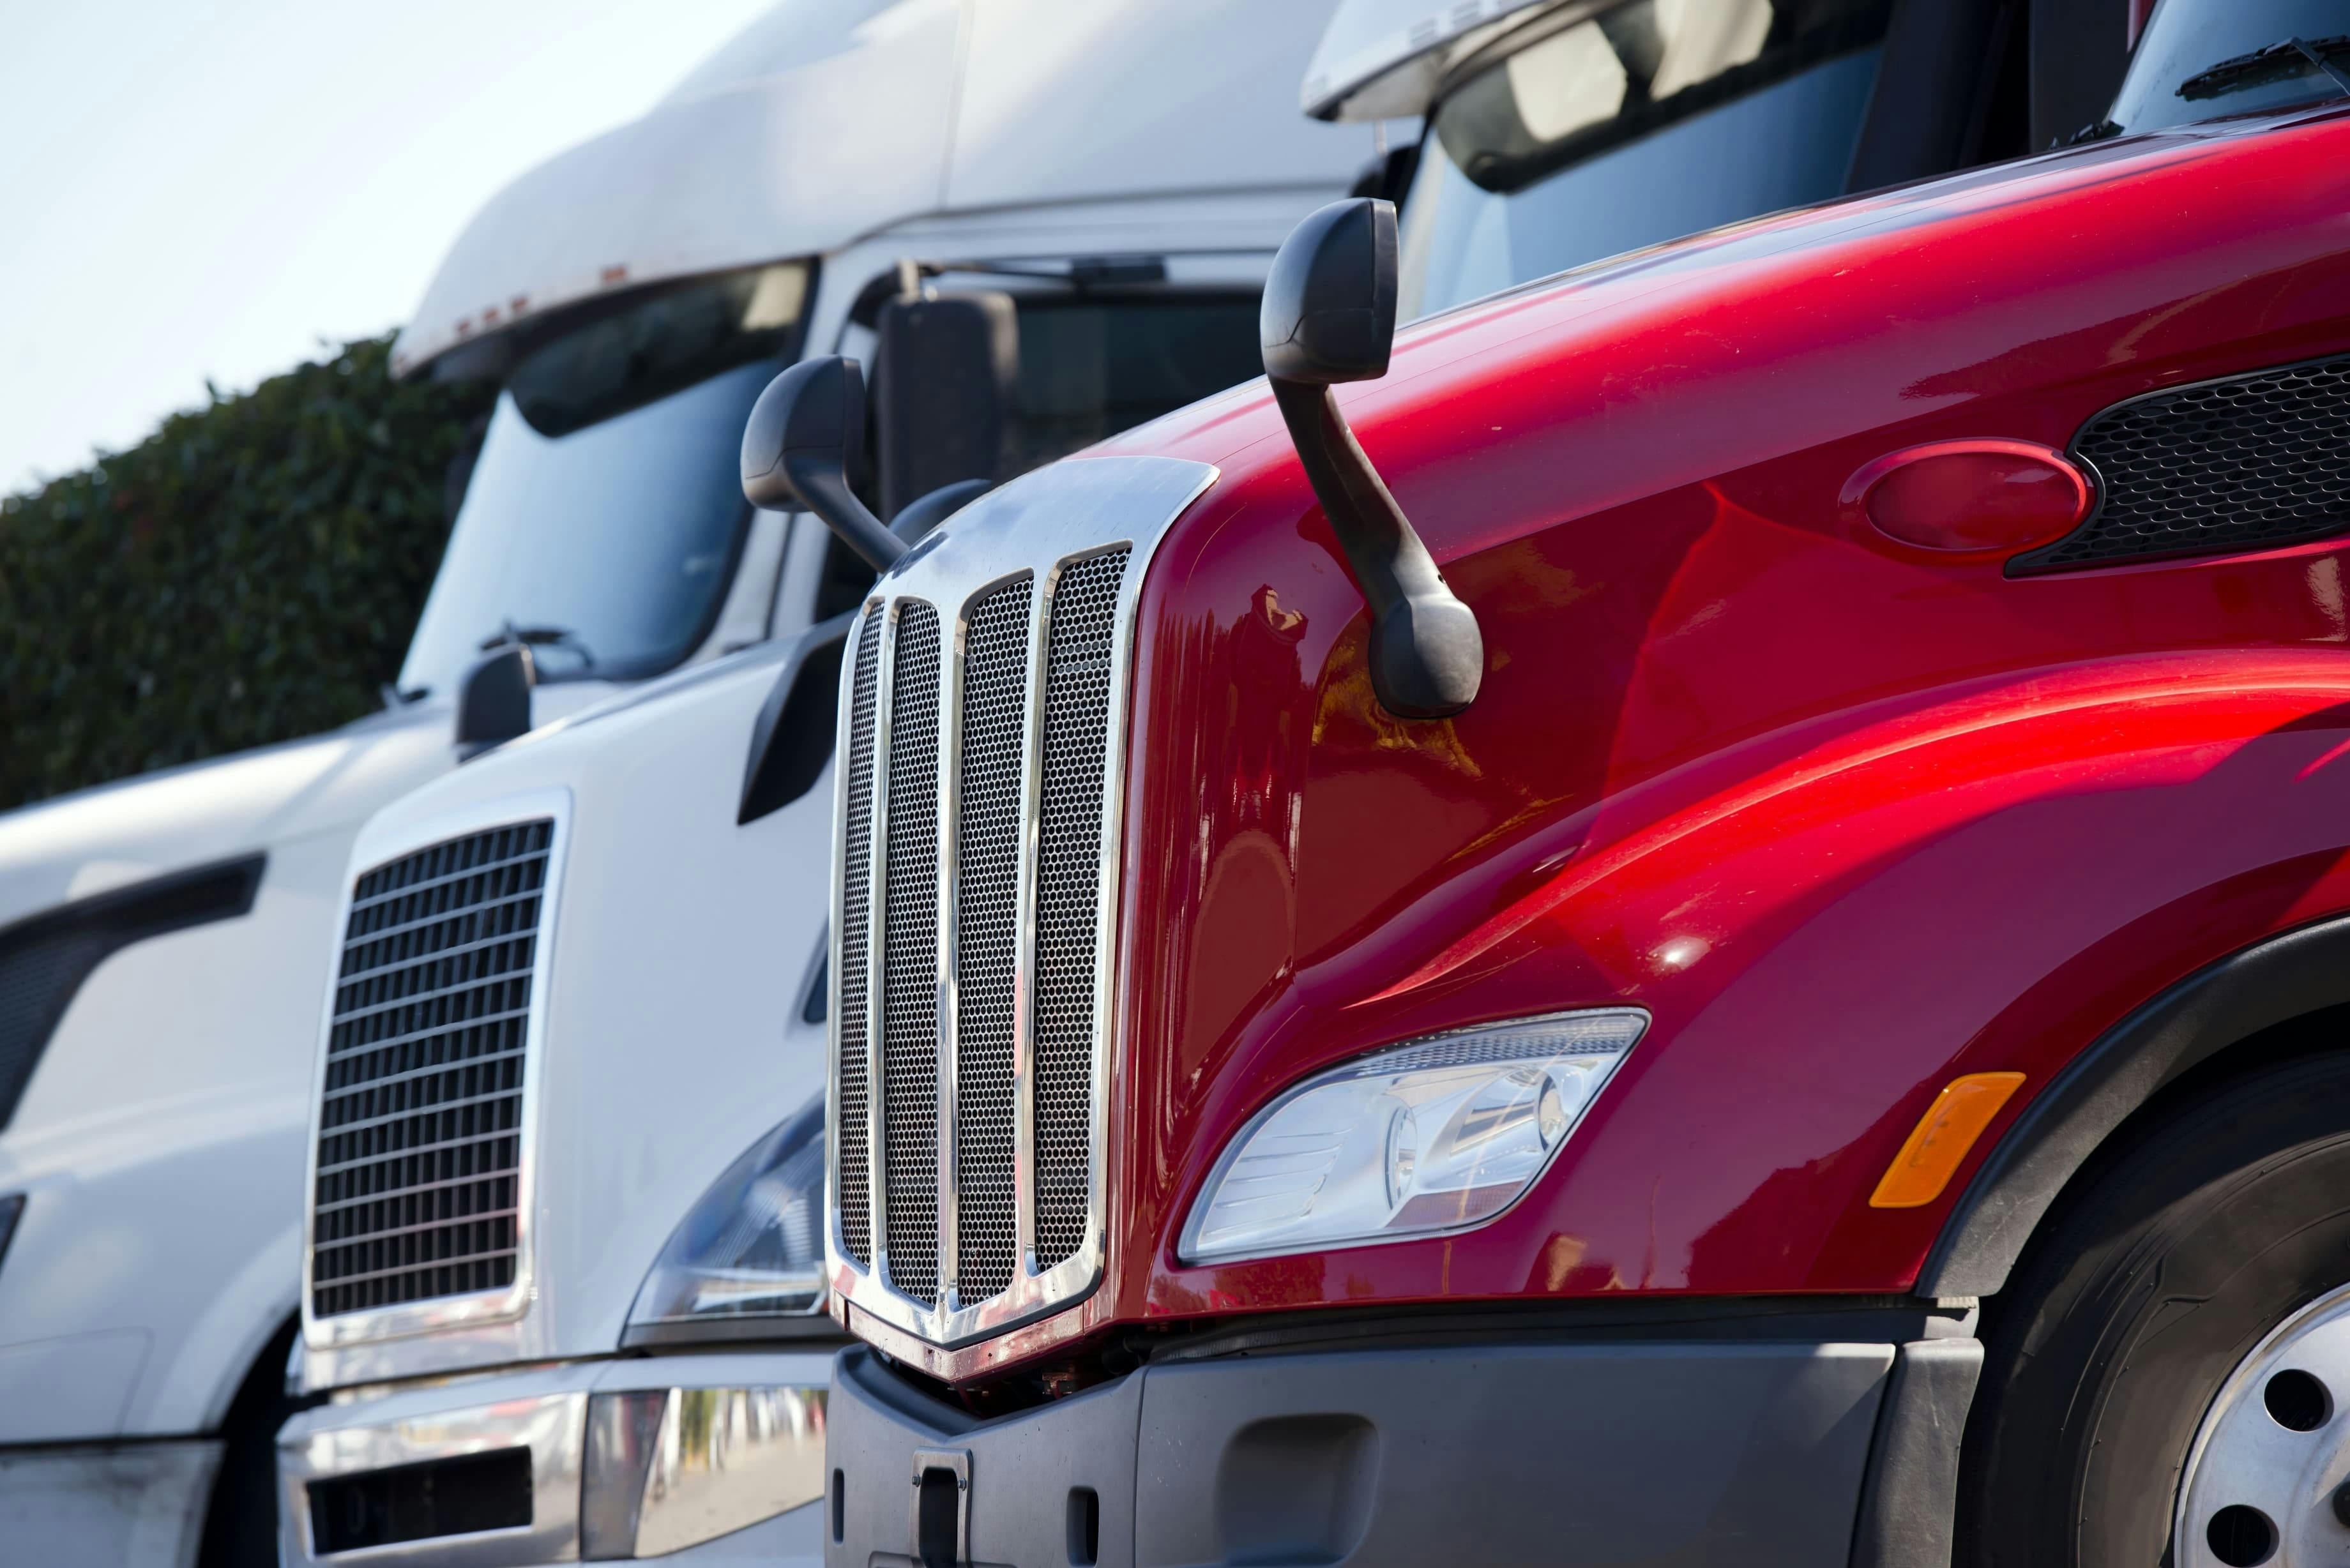 How Accurate Freight Transportation Data Saves You Money